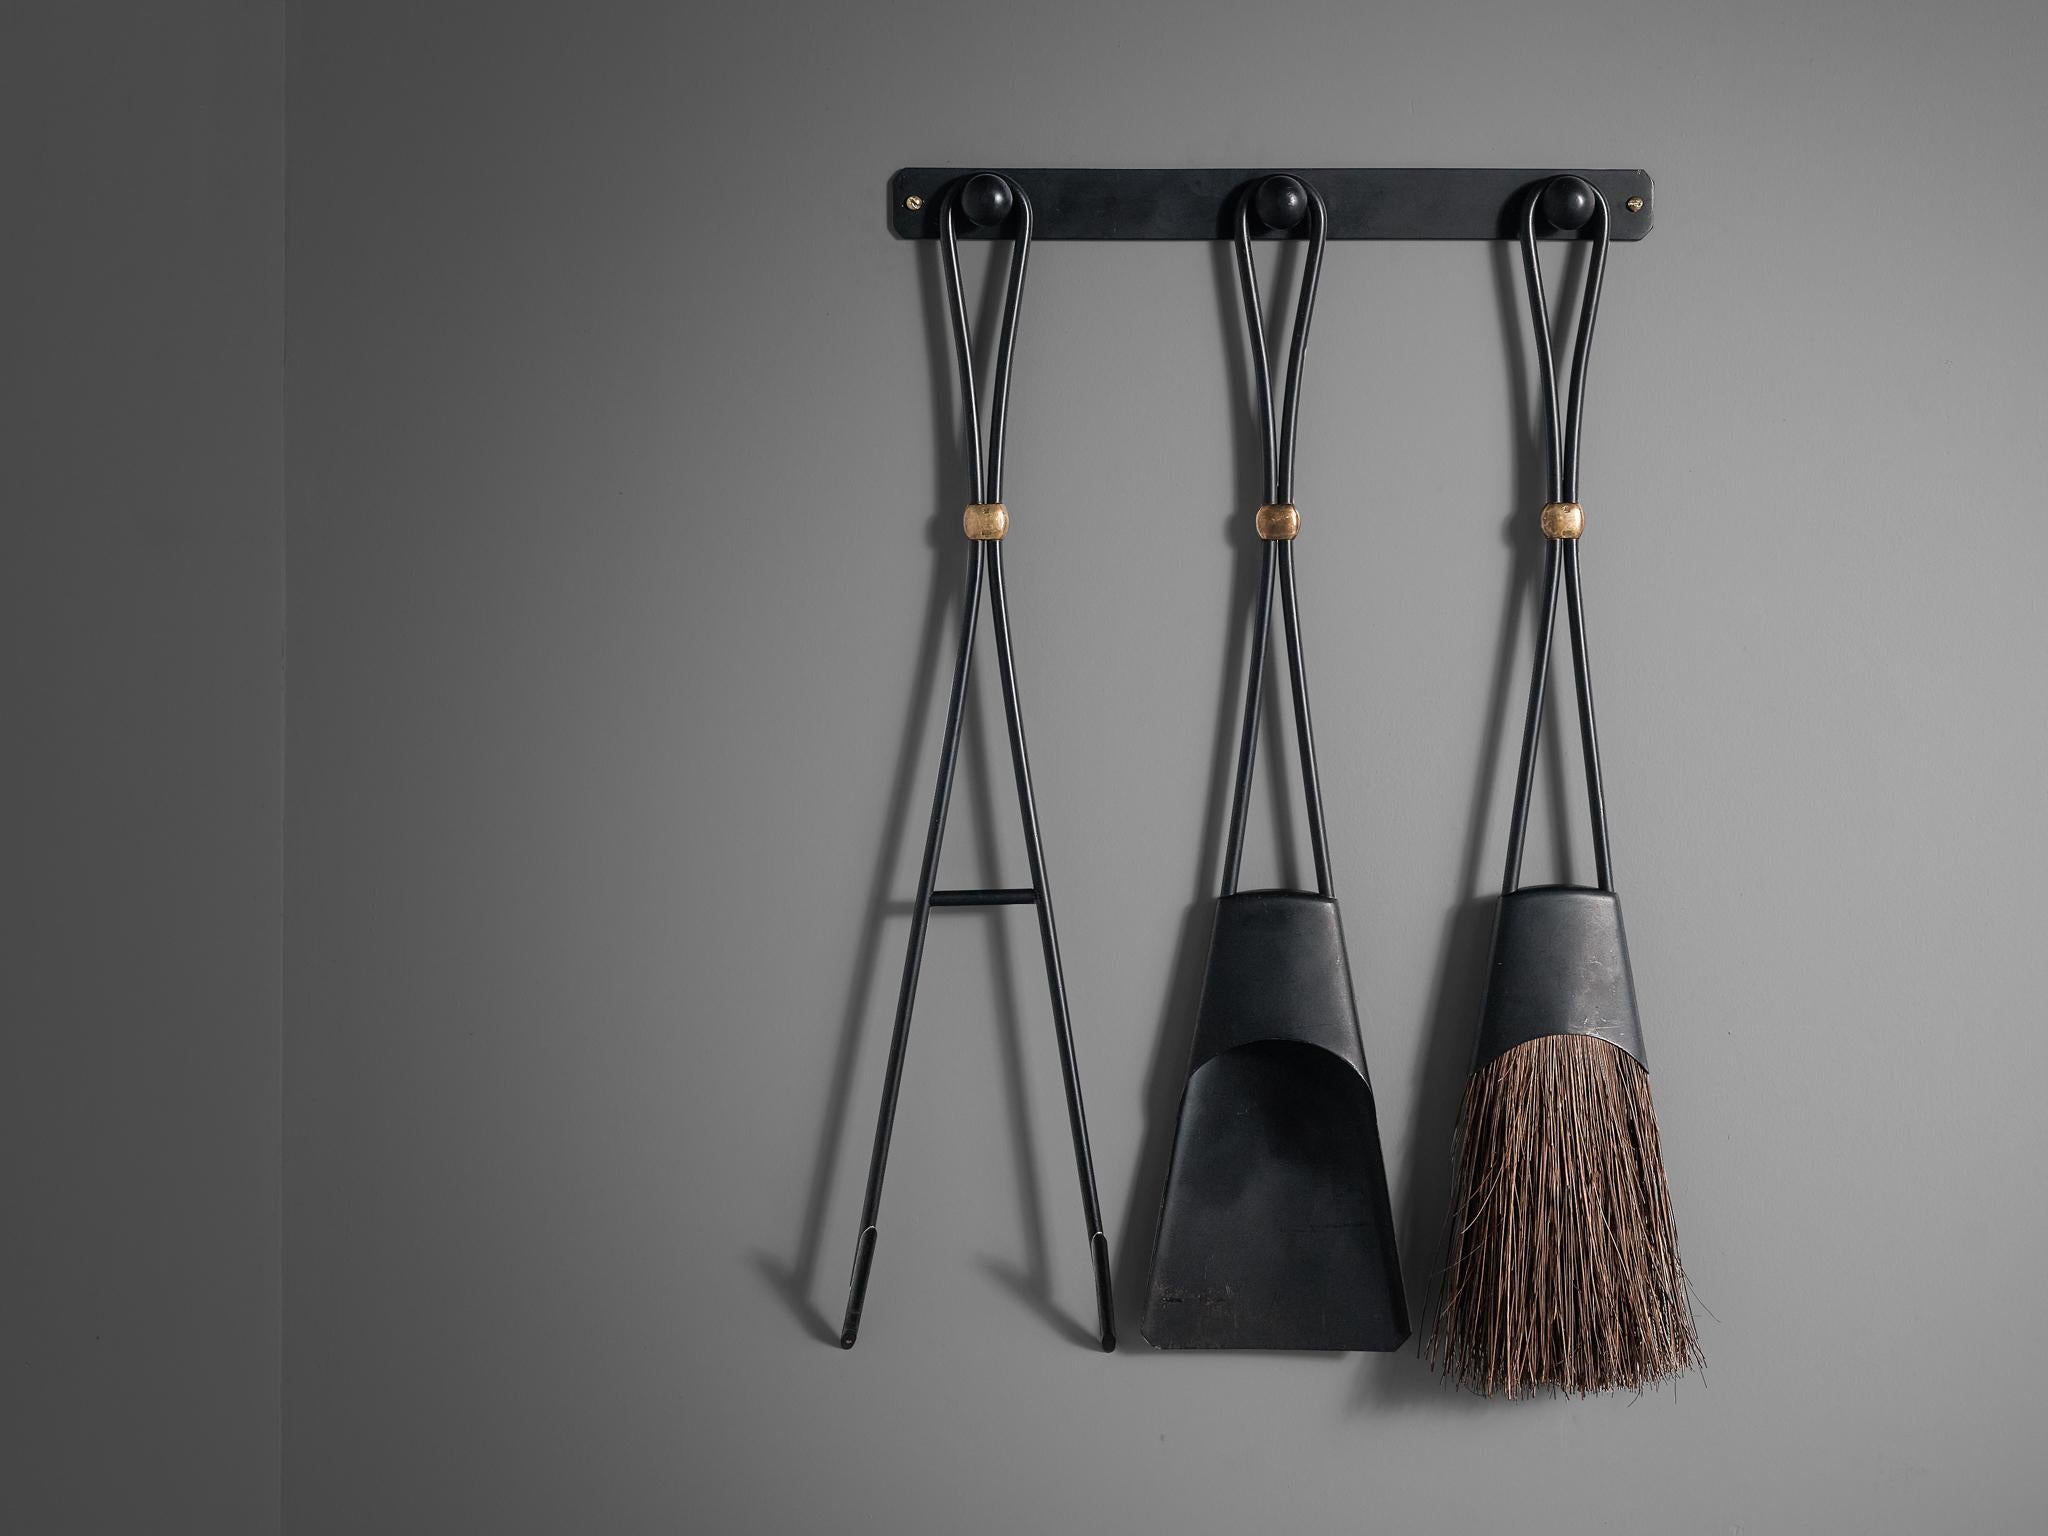 Jens H. Quistgaard, Dansk, fireplace tools, wrought iron and brass, circa 1965.

Rare set of wrought iron fireplace tools with brass accents by the Danish designer Jens H. Quistgaard. The set consist of three items, a shovel, poker, and brush on a